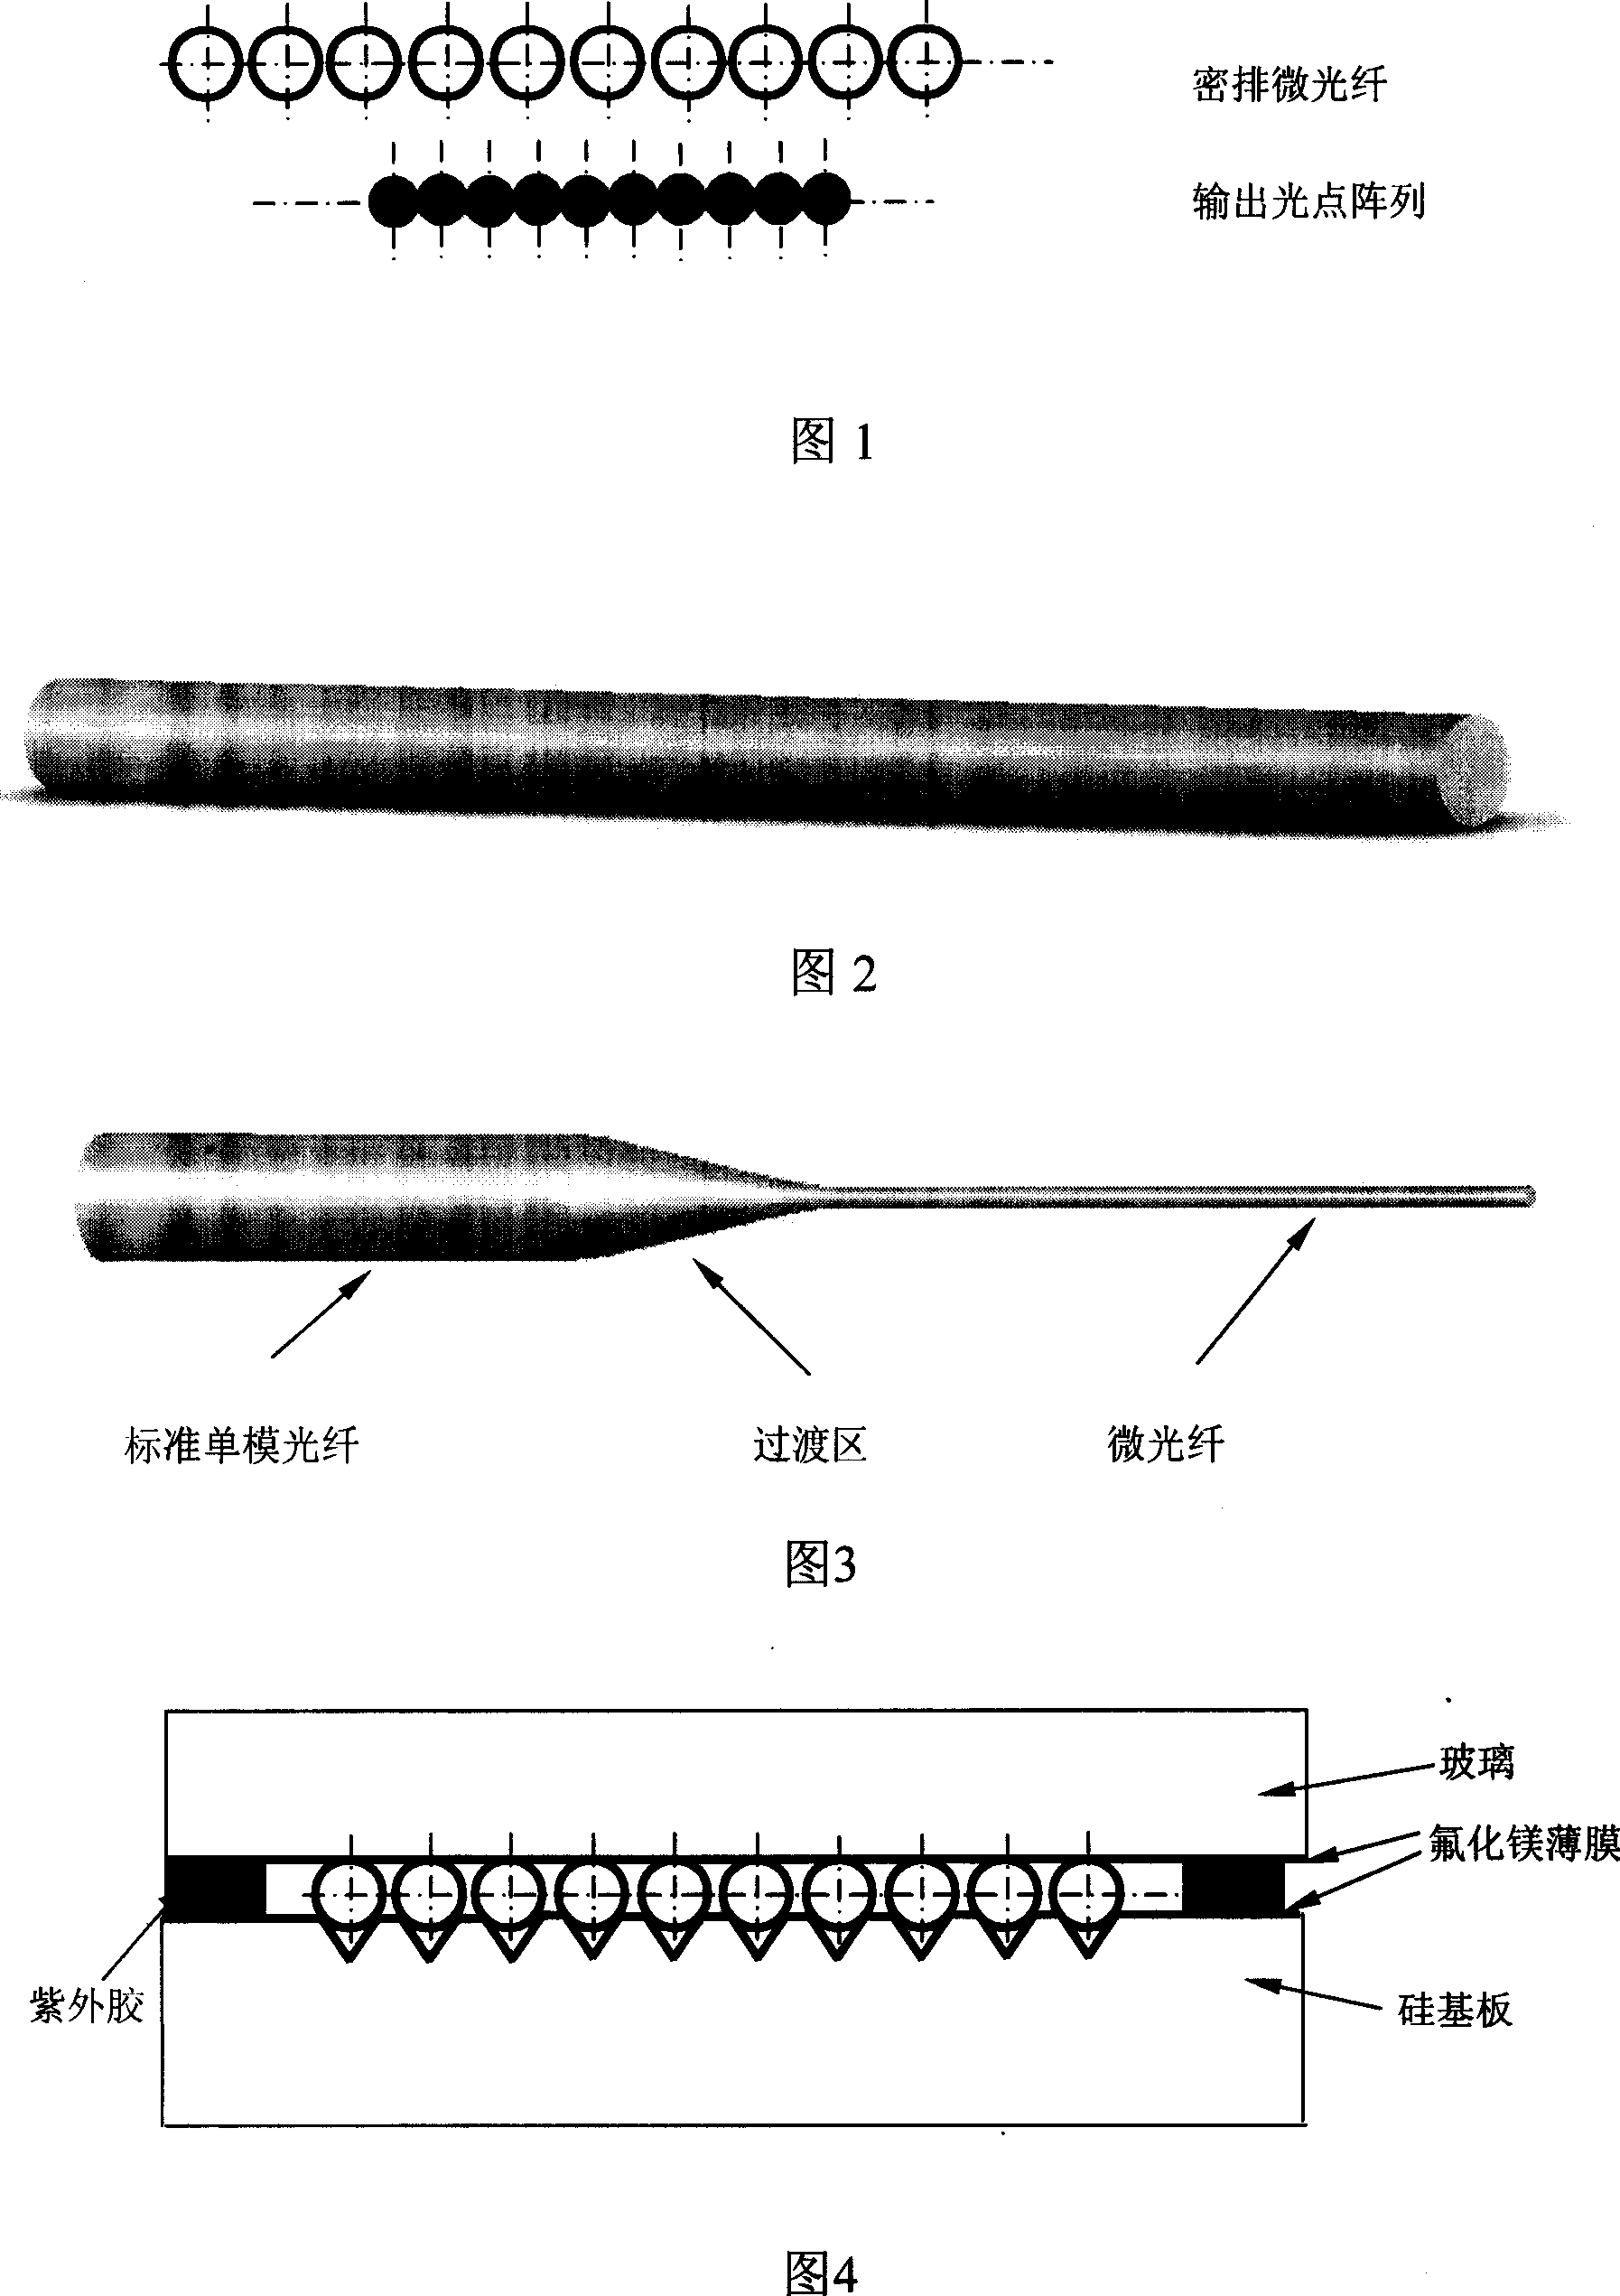 Method for realizing optical point joint seal in optical-fiber close-packed array